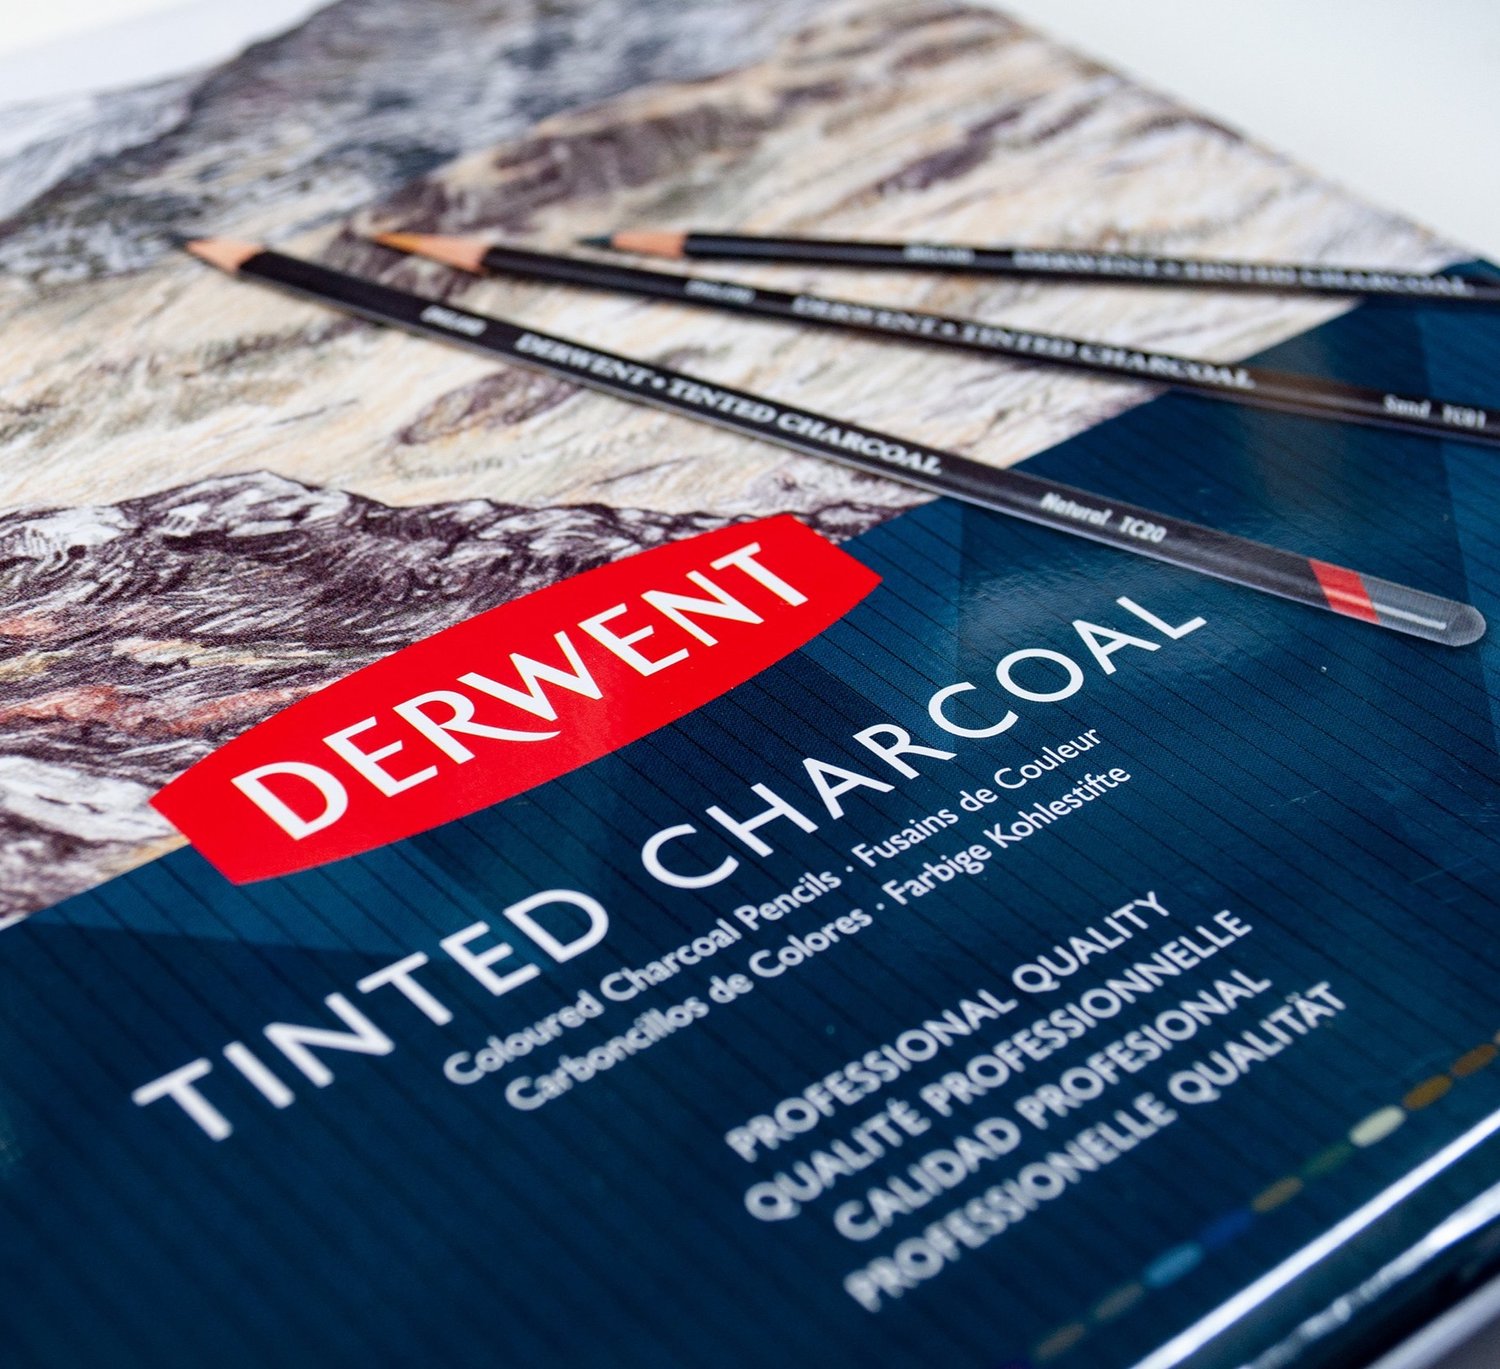 Review Of Derwent Tinted Charcoal Pencils — The Art Gear Guide